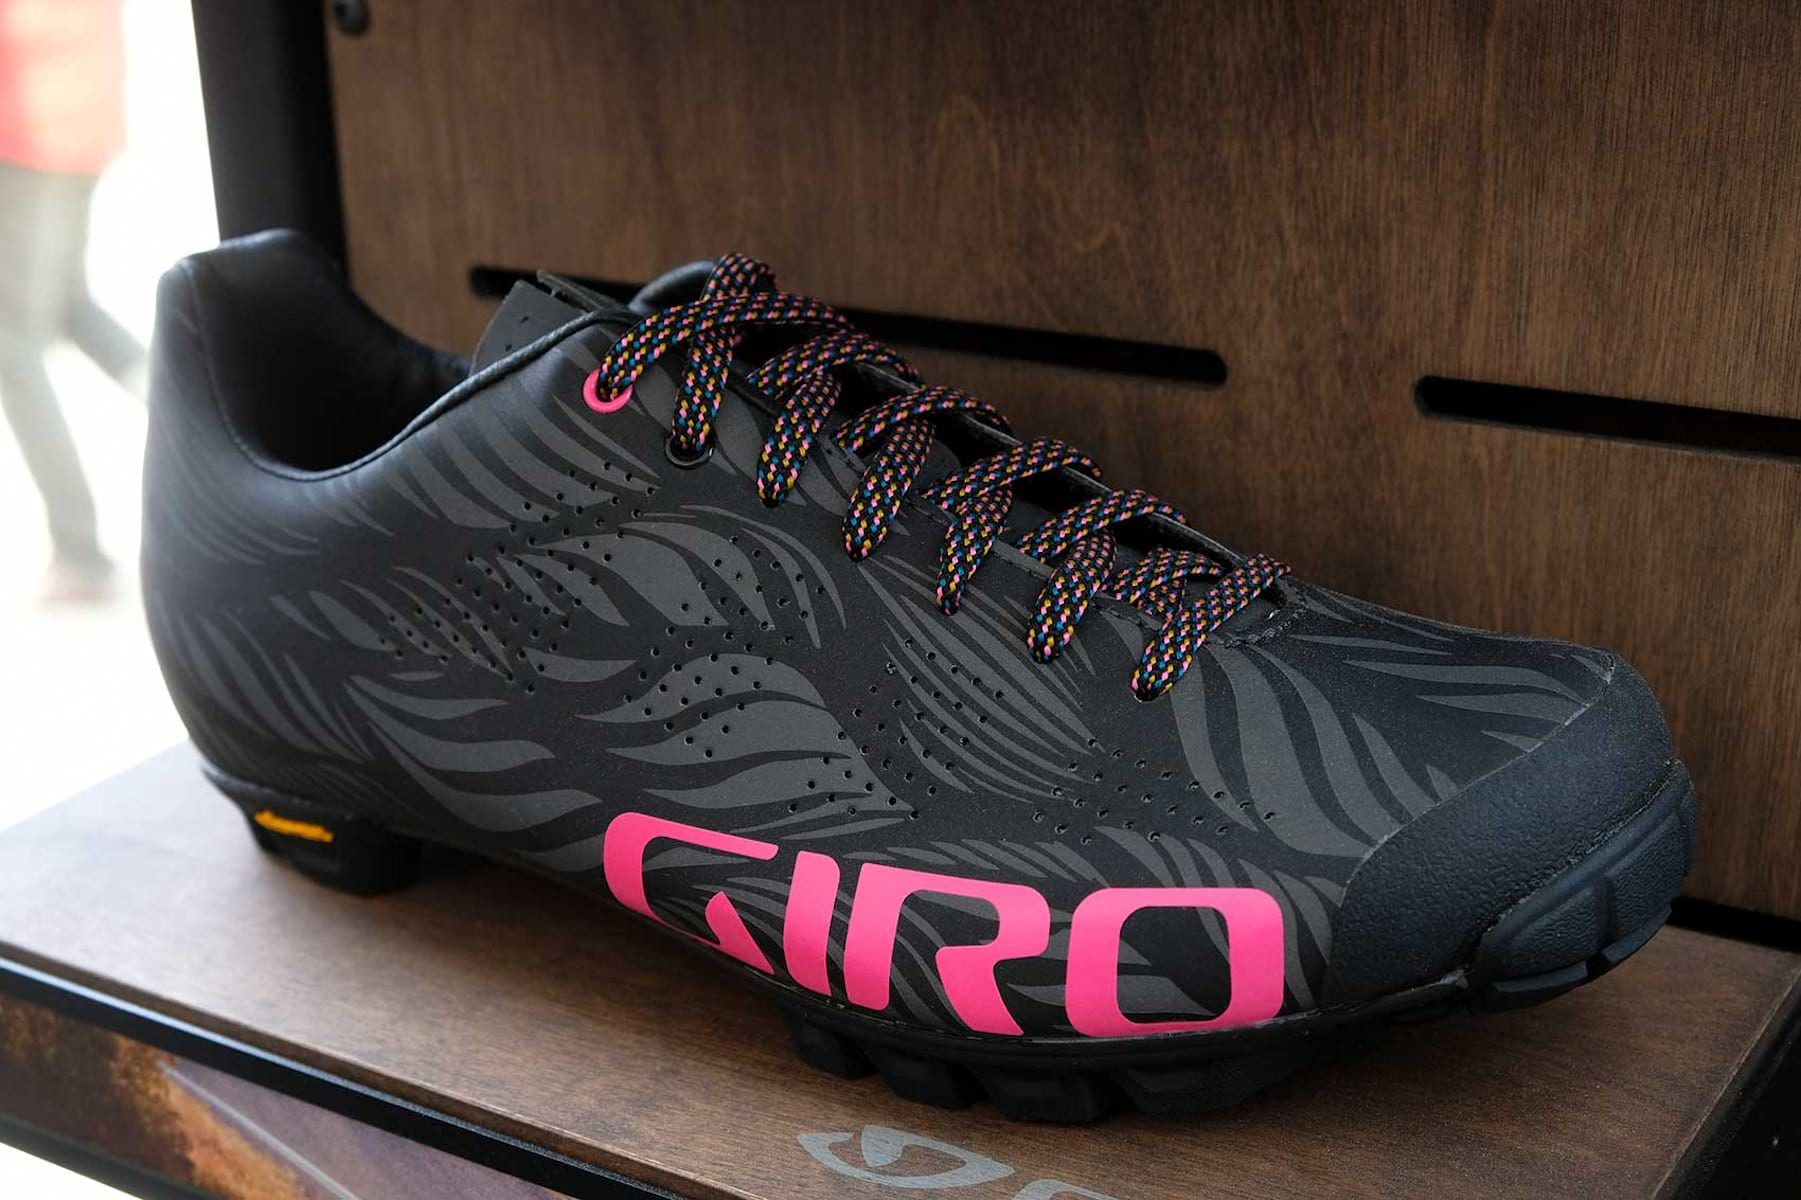 sea otter classic 2019, new products, giro shoes